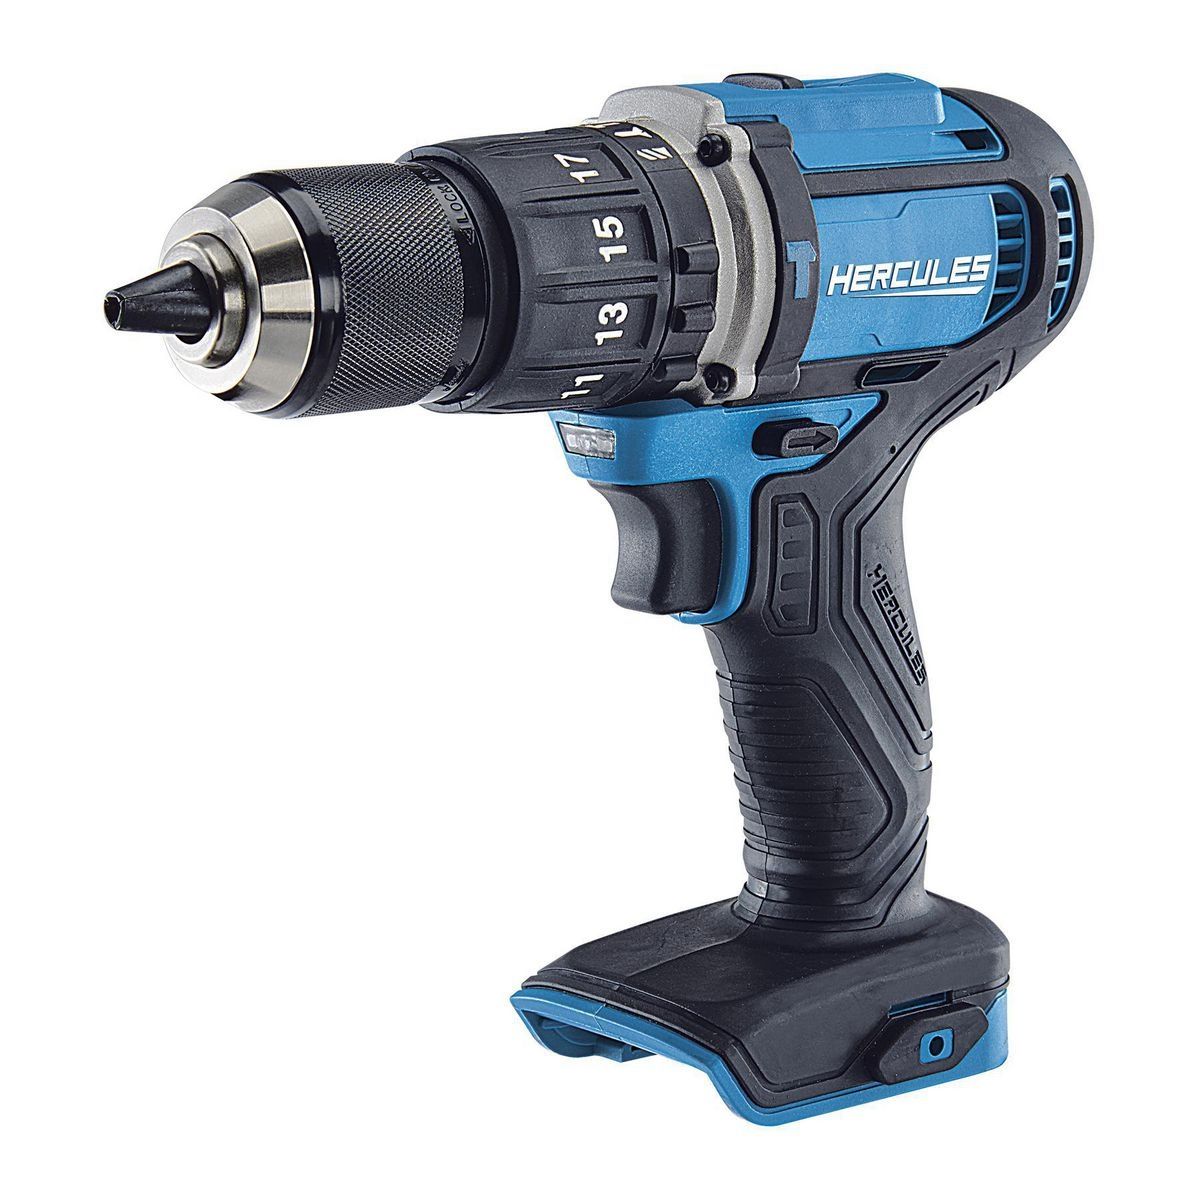 HERCULES 20V Cordless 1/2 in. Compact Variable Speed Hammer Drill/Driver - Tool Only